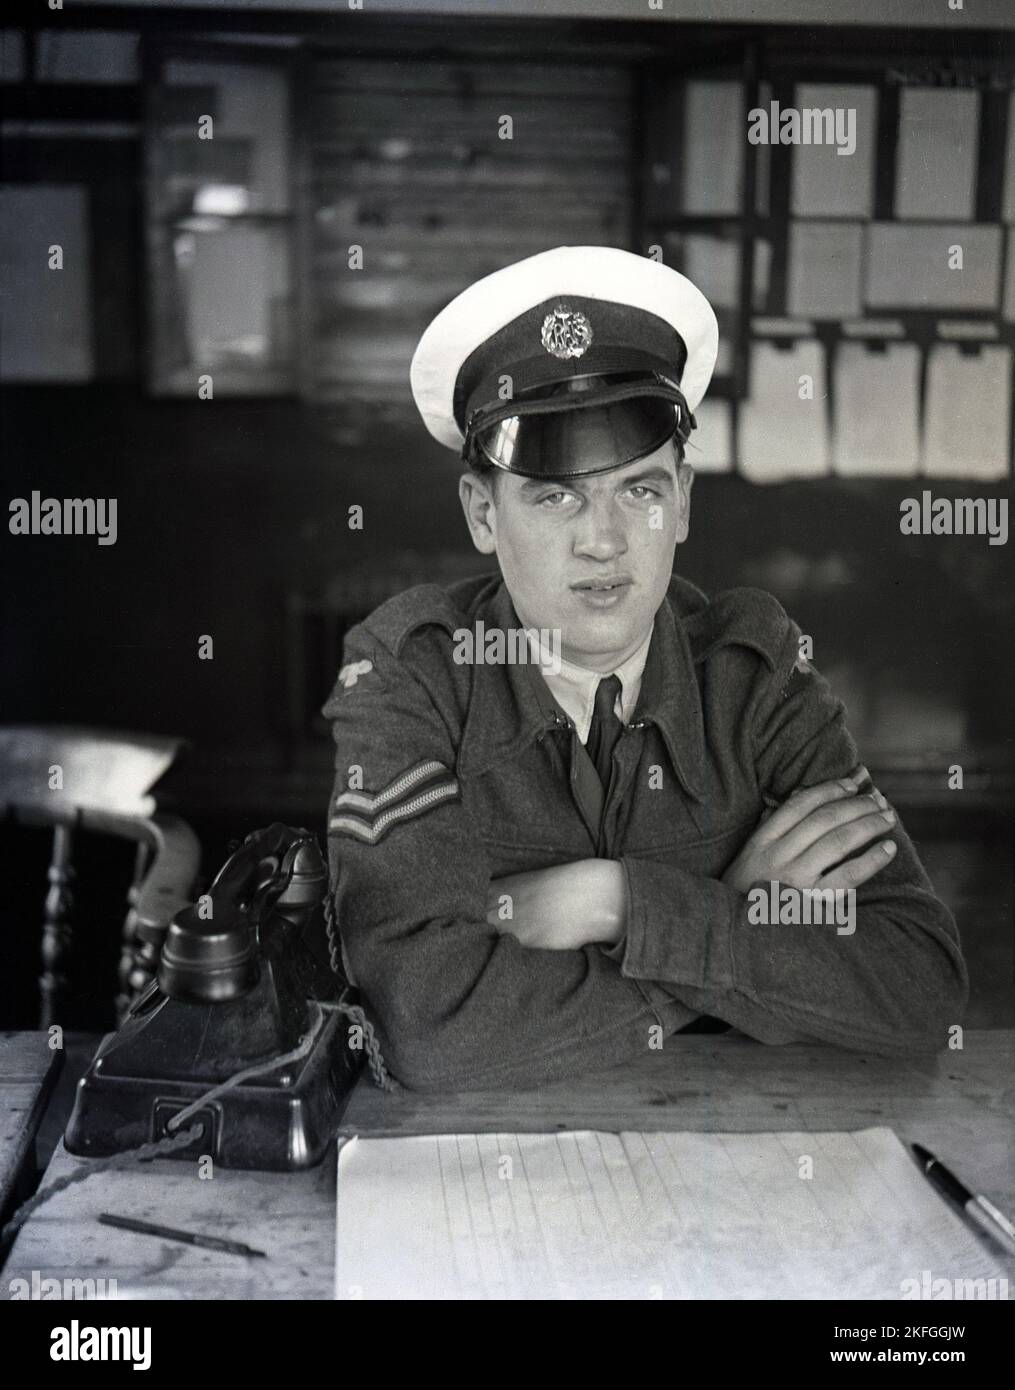 1948, historical, an RAF airman, a corporal, in his uniform and hat sitting at a desk with a telephone of the era and paper pad at the Longford Camp, at RAF Ternhill, near Market Drayton, Shropshire, England, UK. An RAF badge is on his hat. Stock Photo